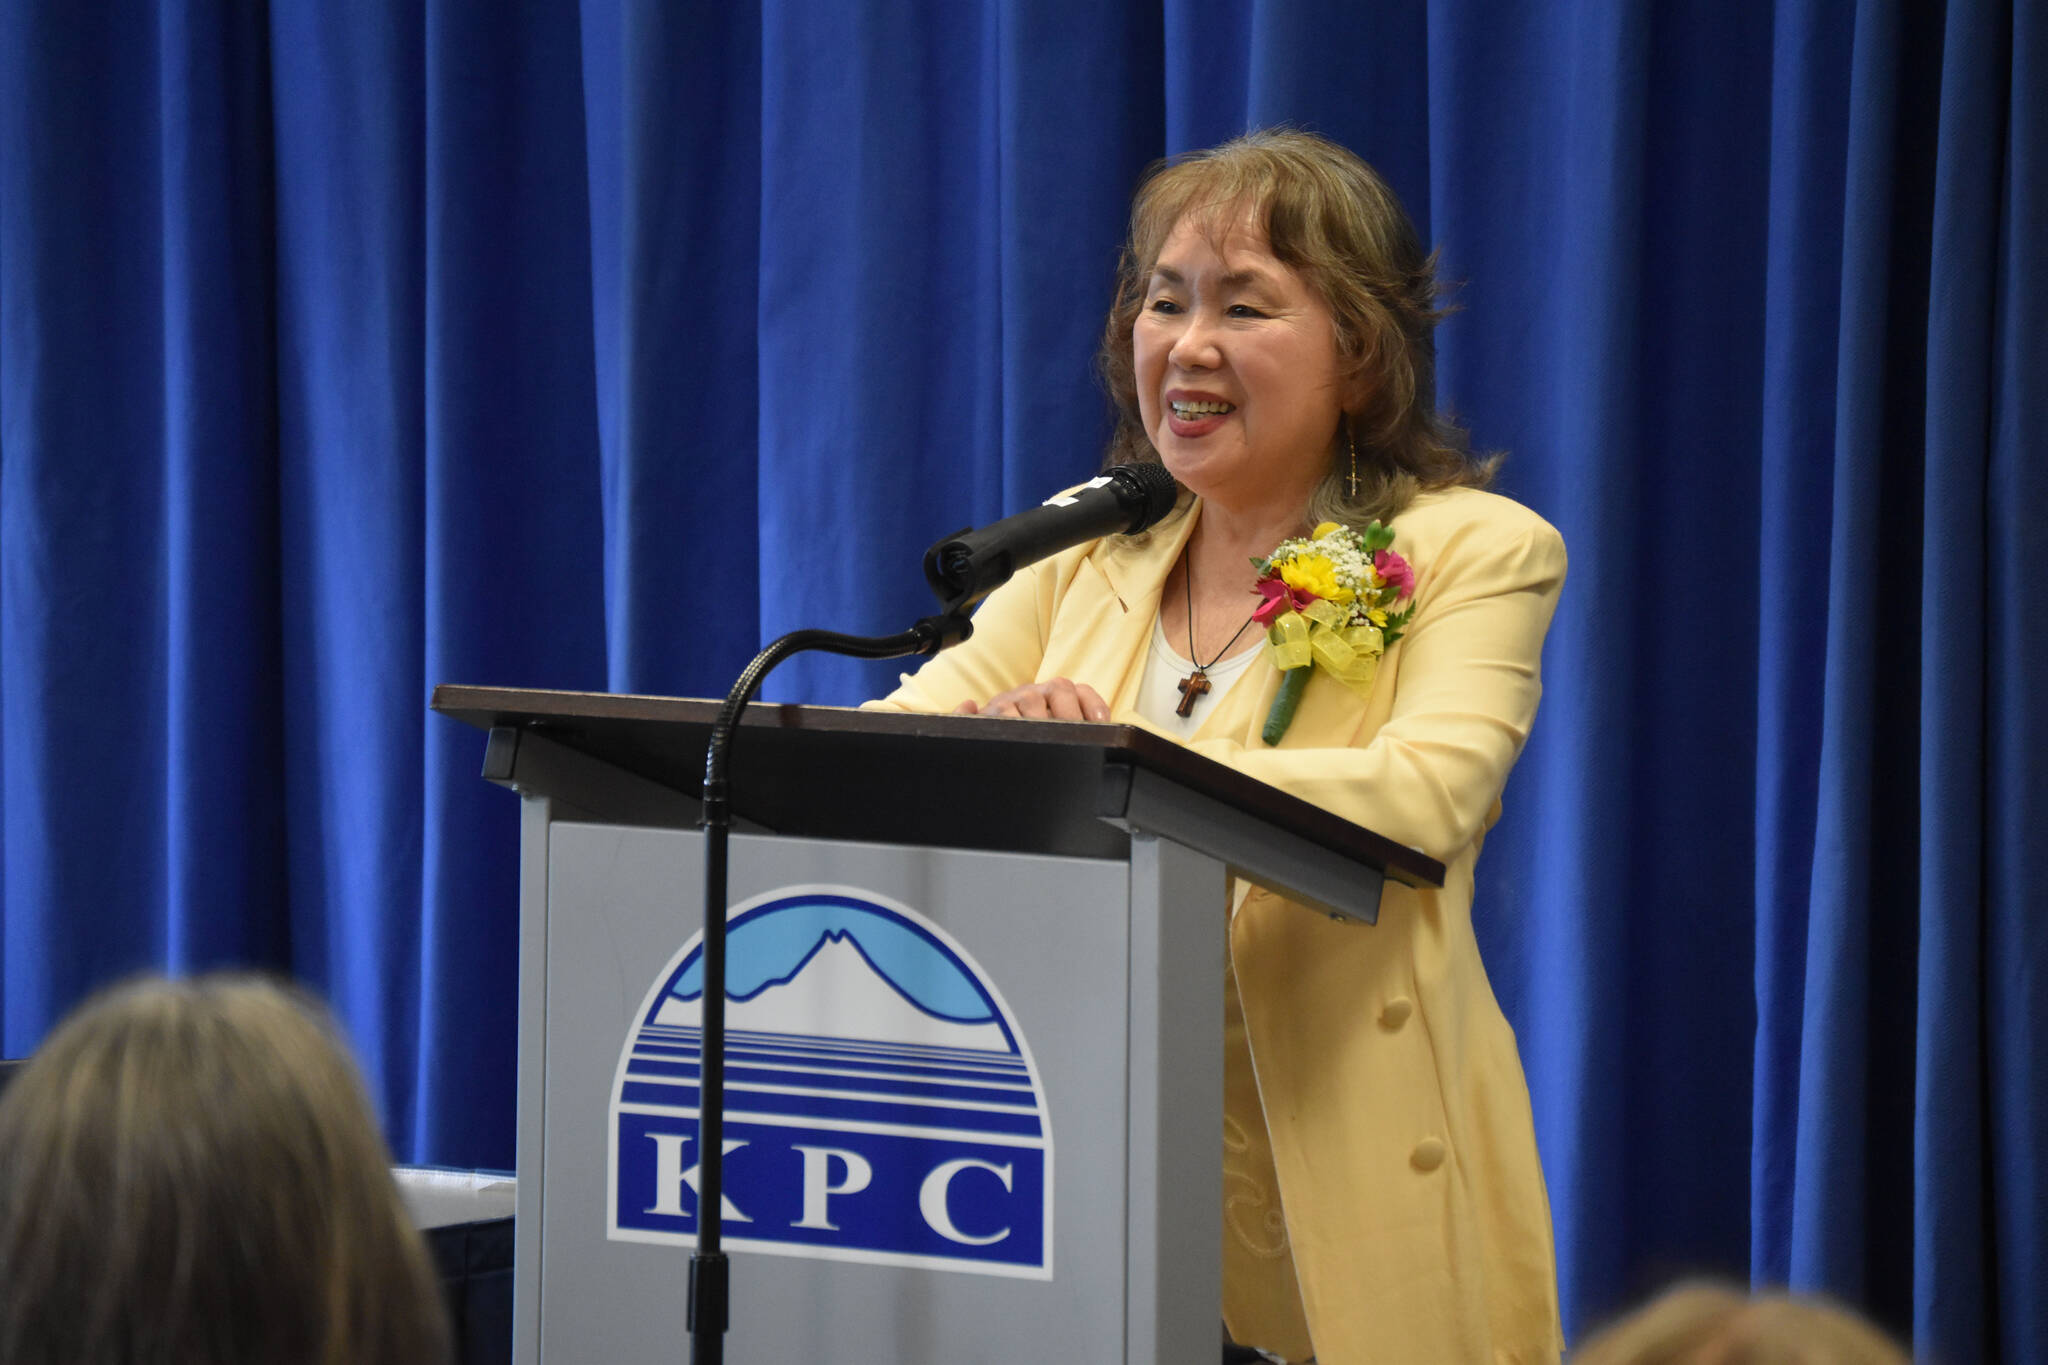 Yasuko Lehtinen speaks at a commendation ceremony where she was awarded the Foreign Minister Commendation on Friday, Oct. 28, 2022, at Kenai Peninsula College in Soldotna, Alaska. (Jake Dye/Peninsula Clarion)